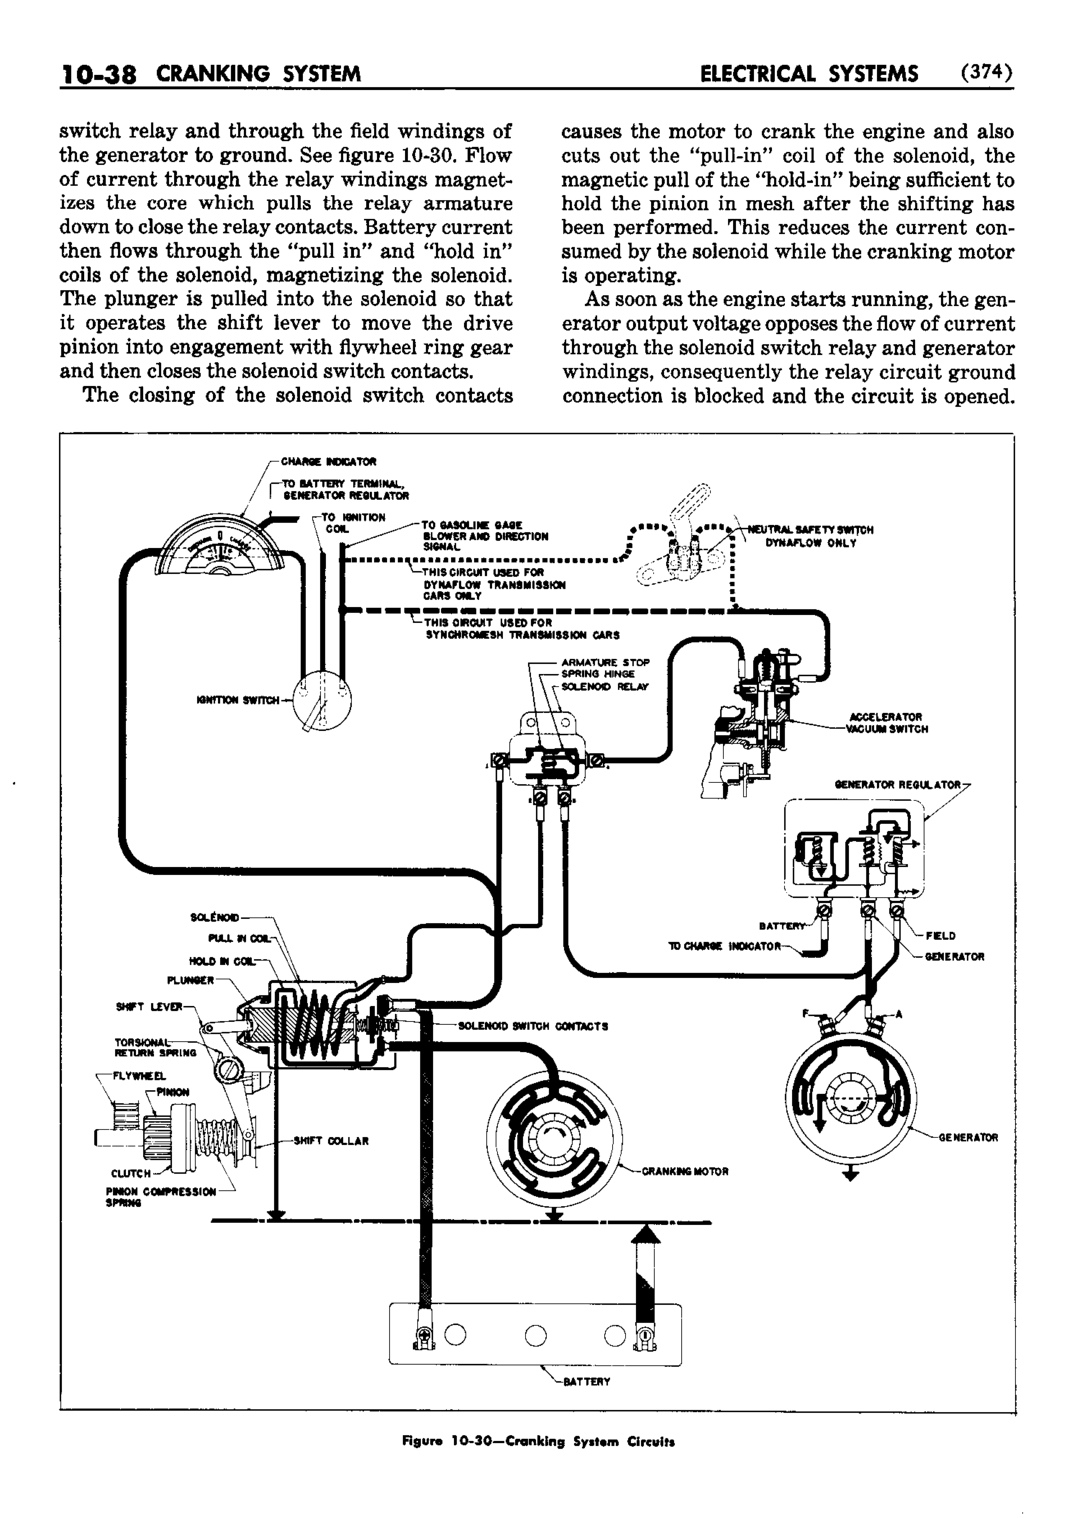 n_11 1952 Buick Shop Manual - Electrical Systems-038-038.jpg